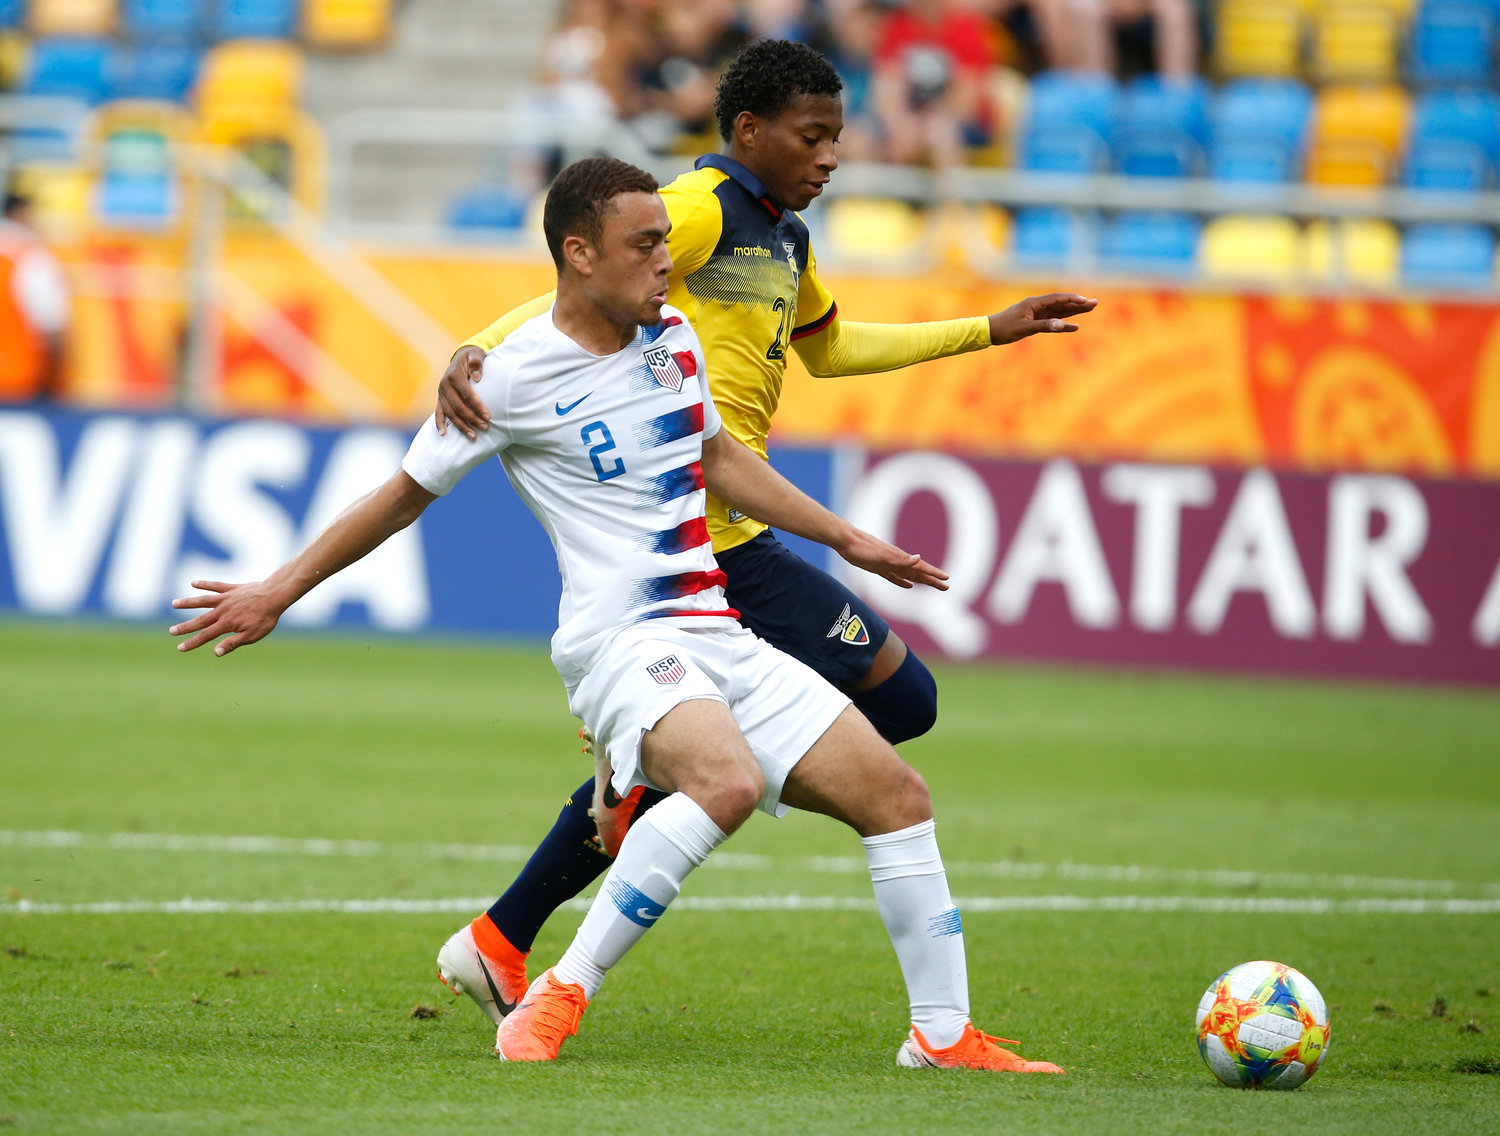 In this June 8, 2019, file photo, United States' Sergino Dest, left, and Ecuador's Gonzalo Plata challenge for the ball during a quarterfinal soccer match at the U20 World Cup in Gdynia, Poland. Sergi√±o Dest is set to become the first American to play for AC Milan in Serie A after the Italian champion signed the defender on loan from Barcelona on Thursday, Sept. 1, 2022, shortly before the transfer window shut.